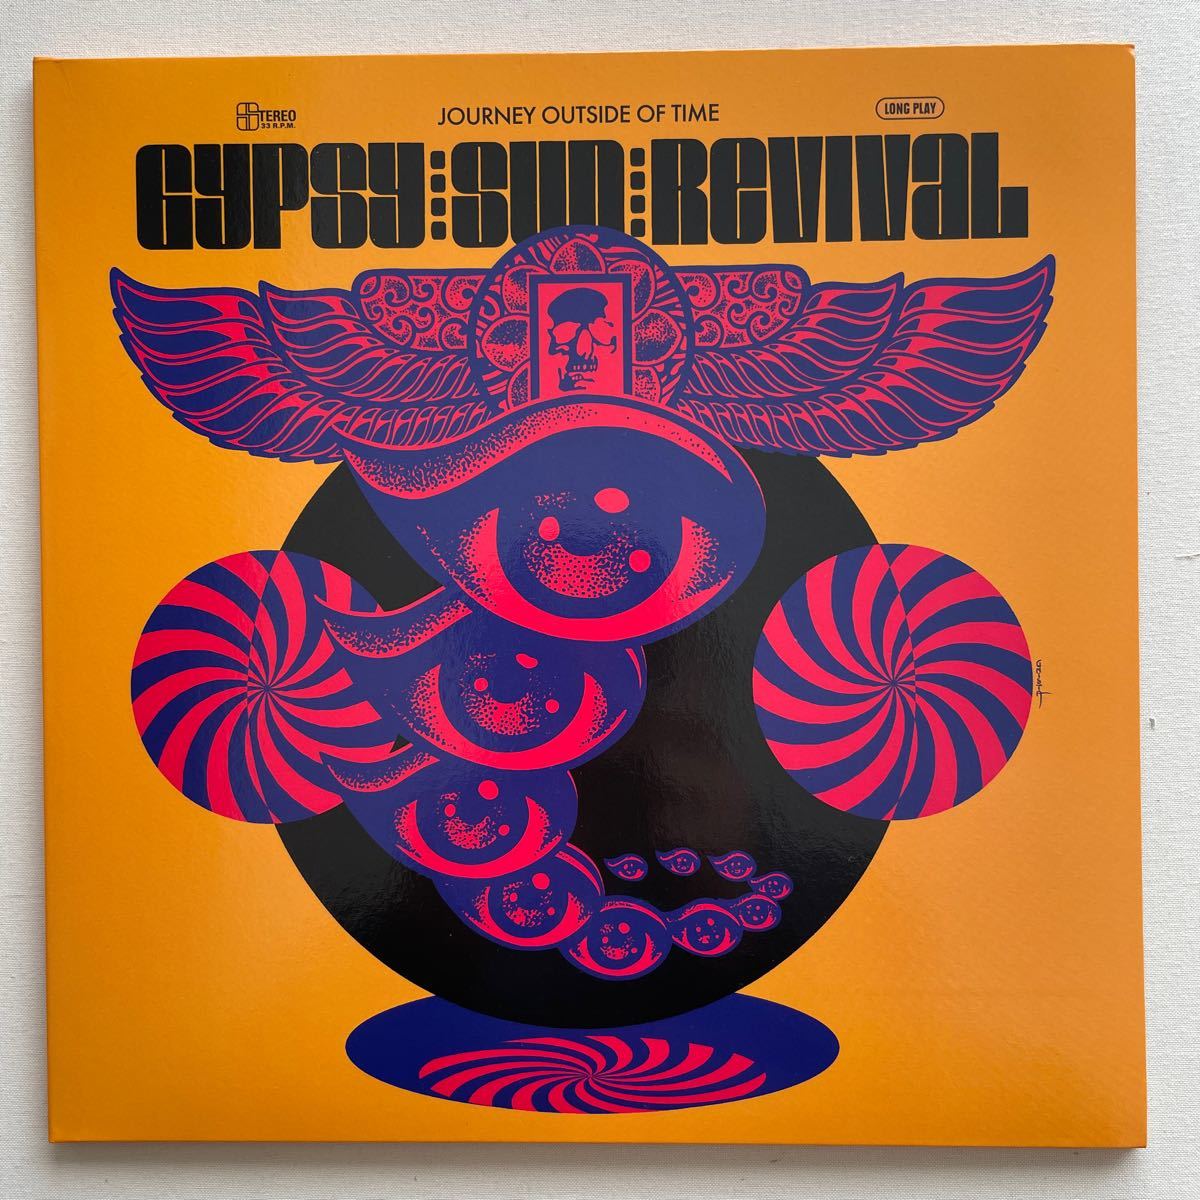 GYPSY SUN REVIVAL - journey outside of time LP サイケ クラウトロック psych acid space stoner rock krautrock psychedelic _画像1